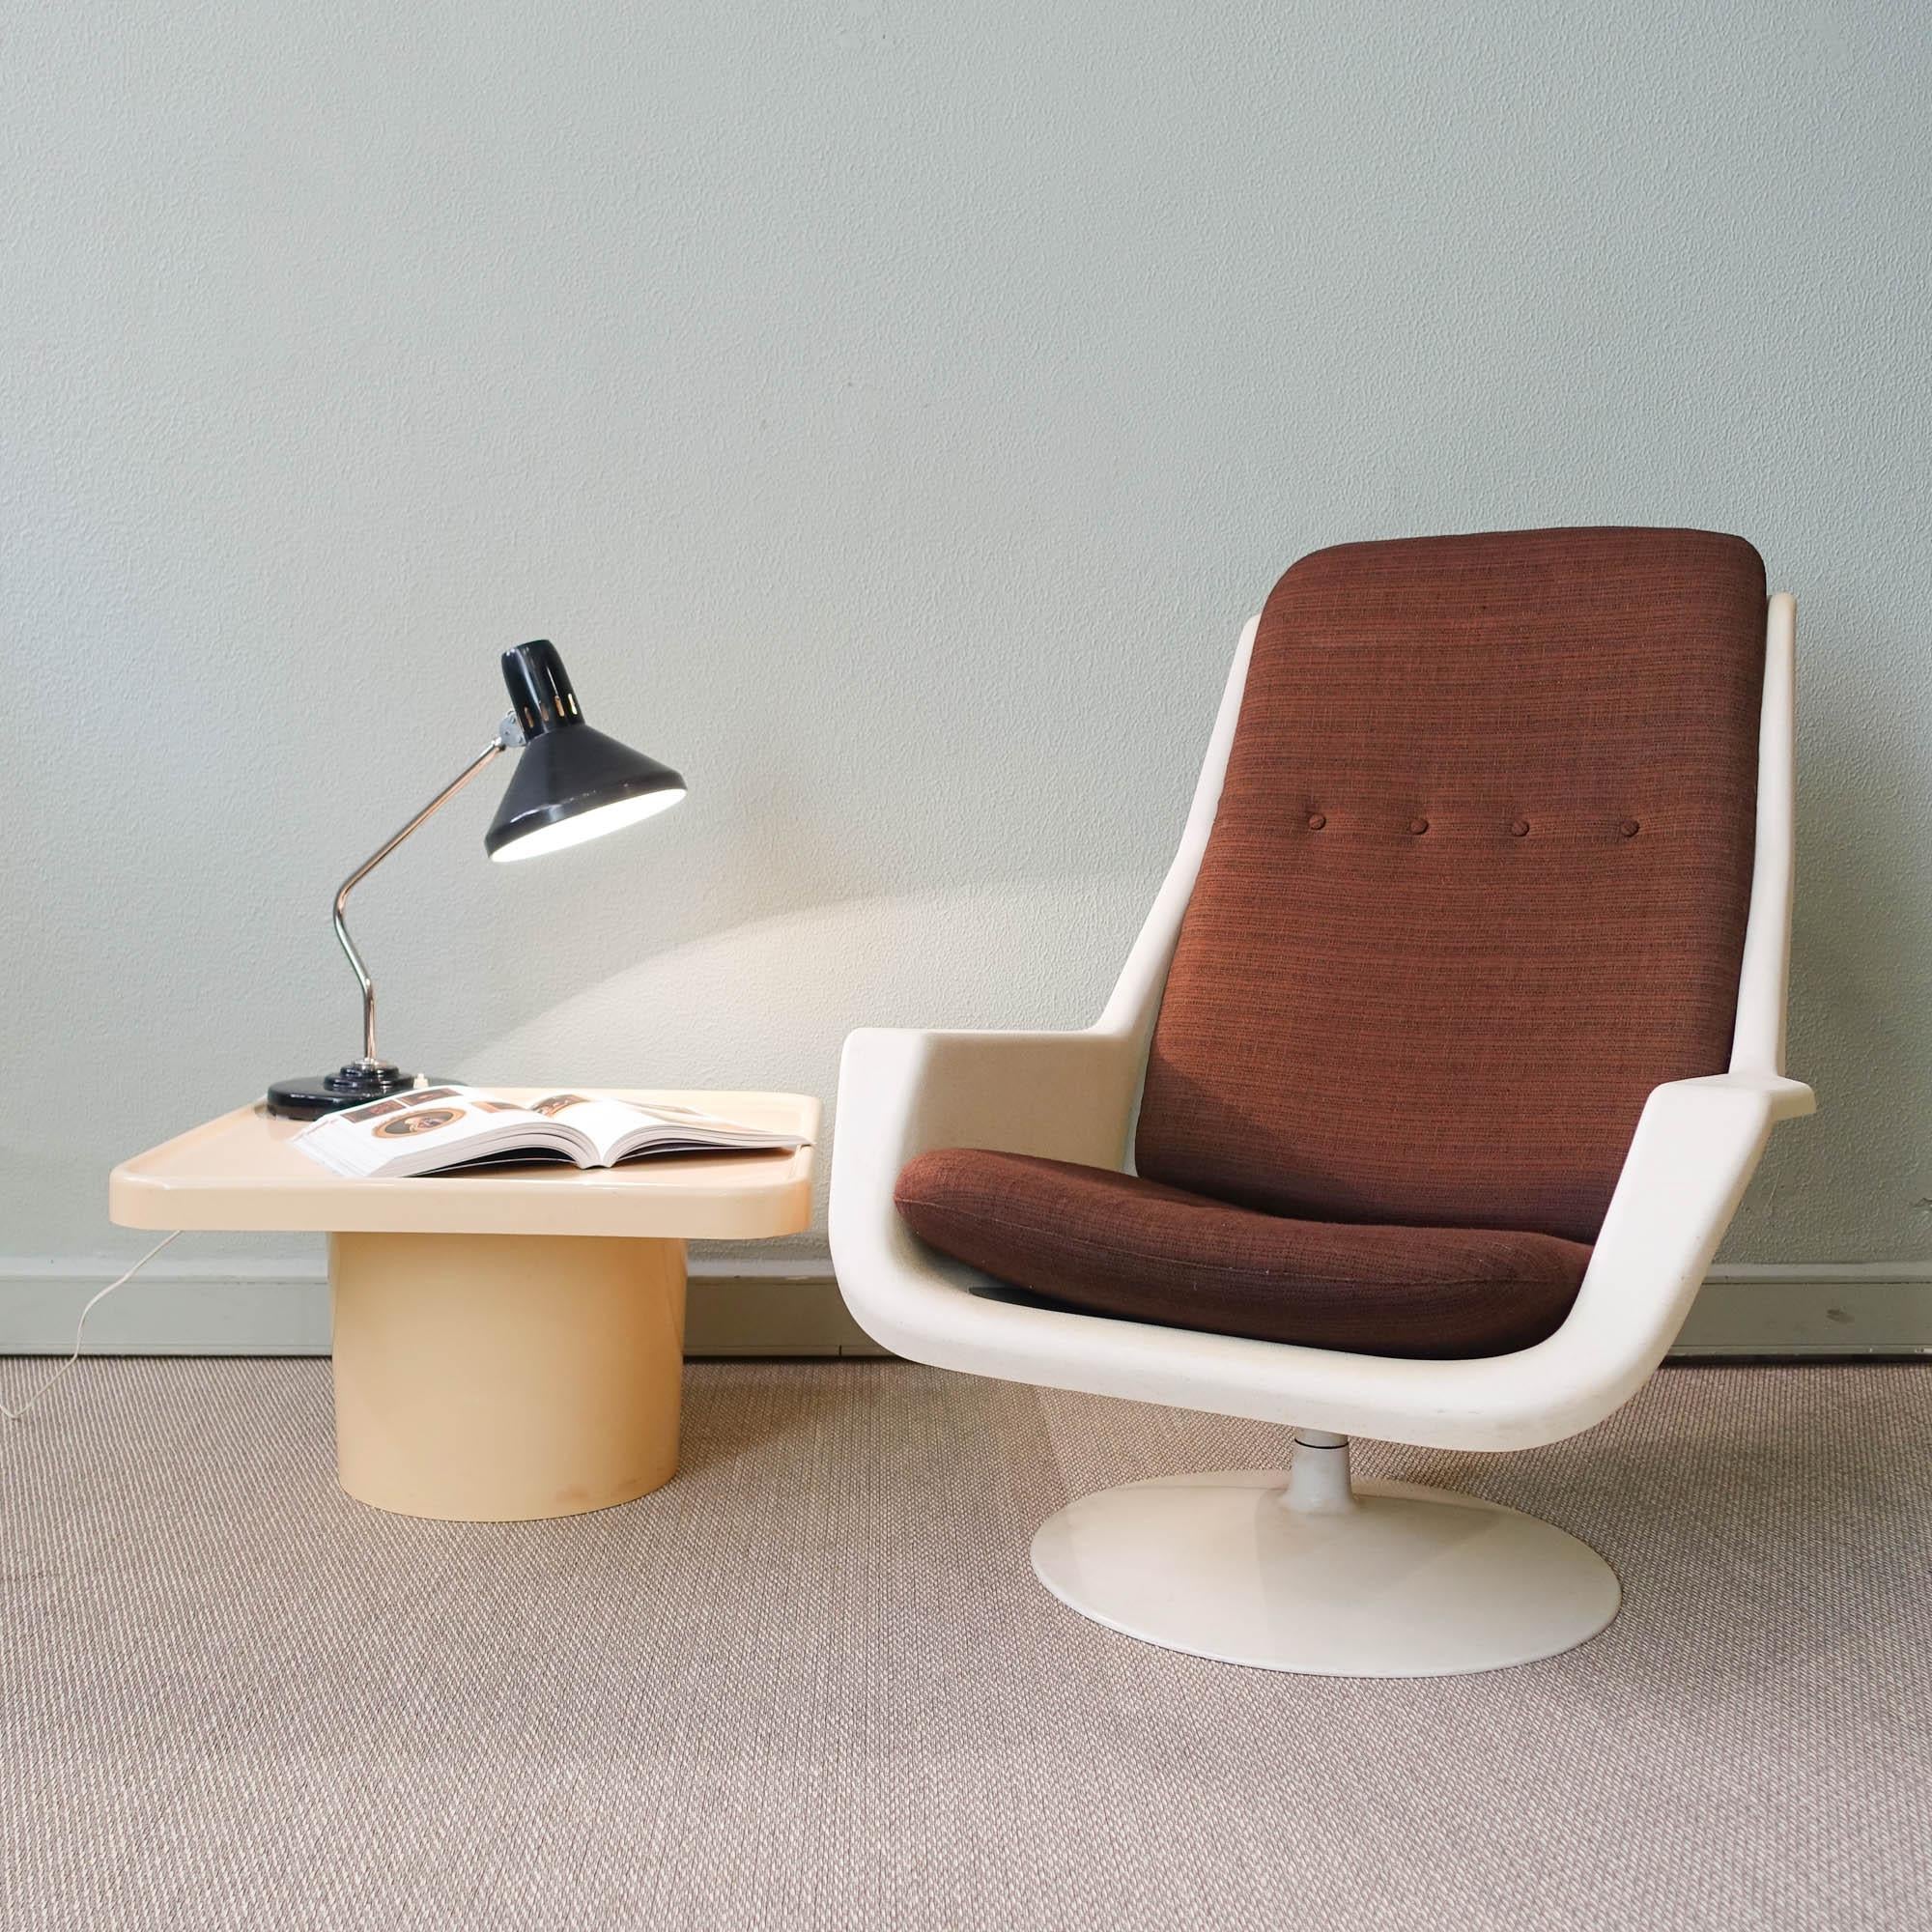 This set of lounge chair and side table was designed by Robin Day for Hille, in UK, during the 1970's. The lounge chair is a polypropylene frame that stands on a metal circular swivel base. It is in a used condition with some scratches here and